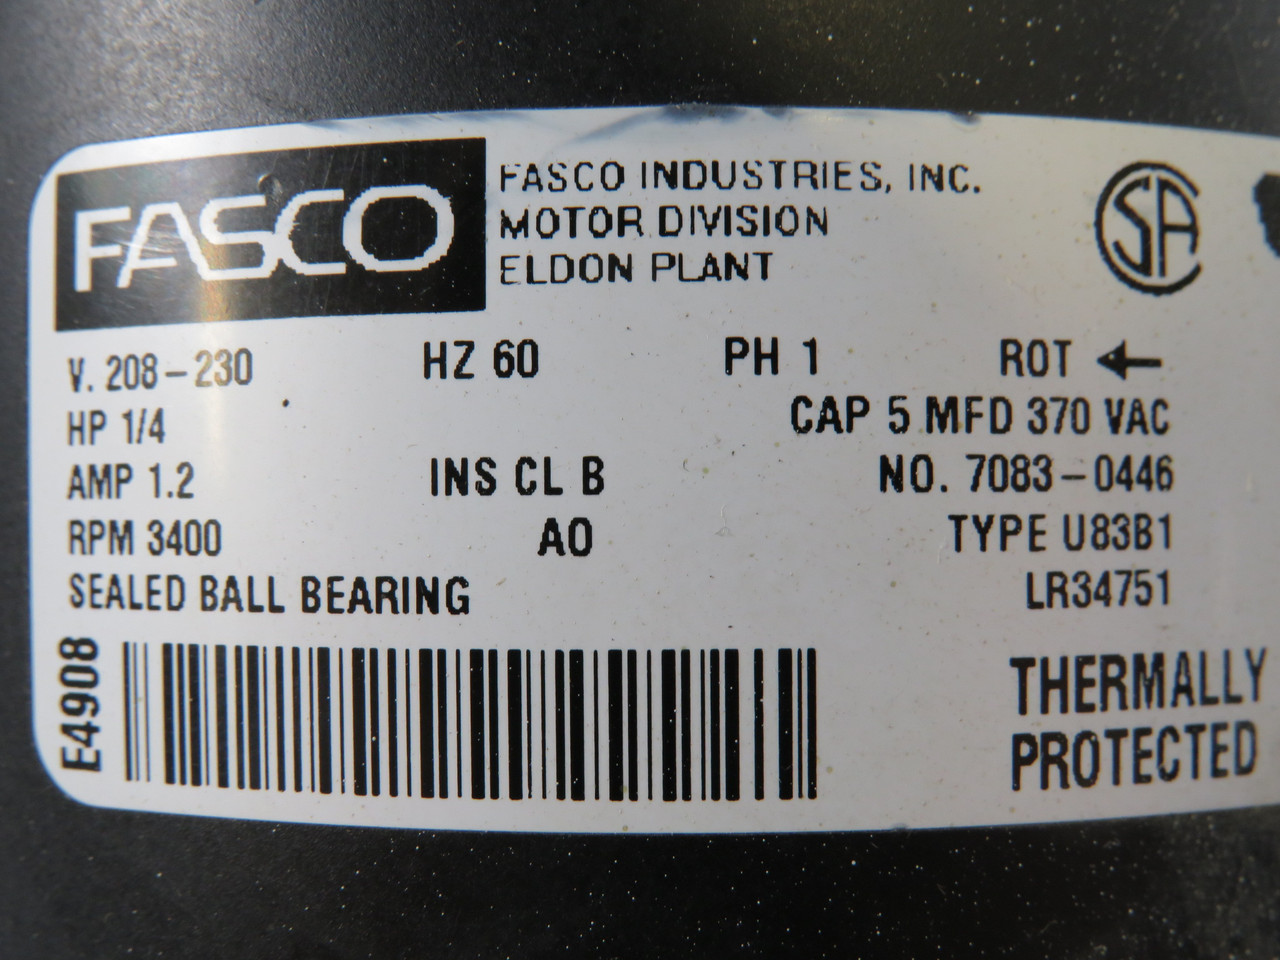 Fasco Blower Motor 1/4HP 3400RPM 208-230V 1Ph 1.2A 60Hz MISSING PLATE USED